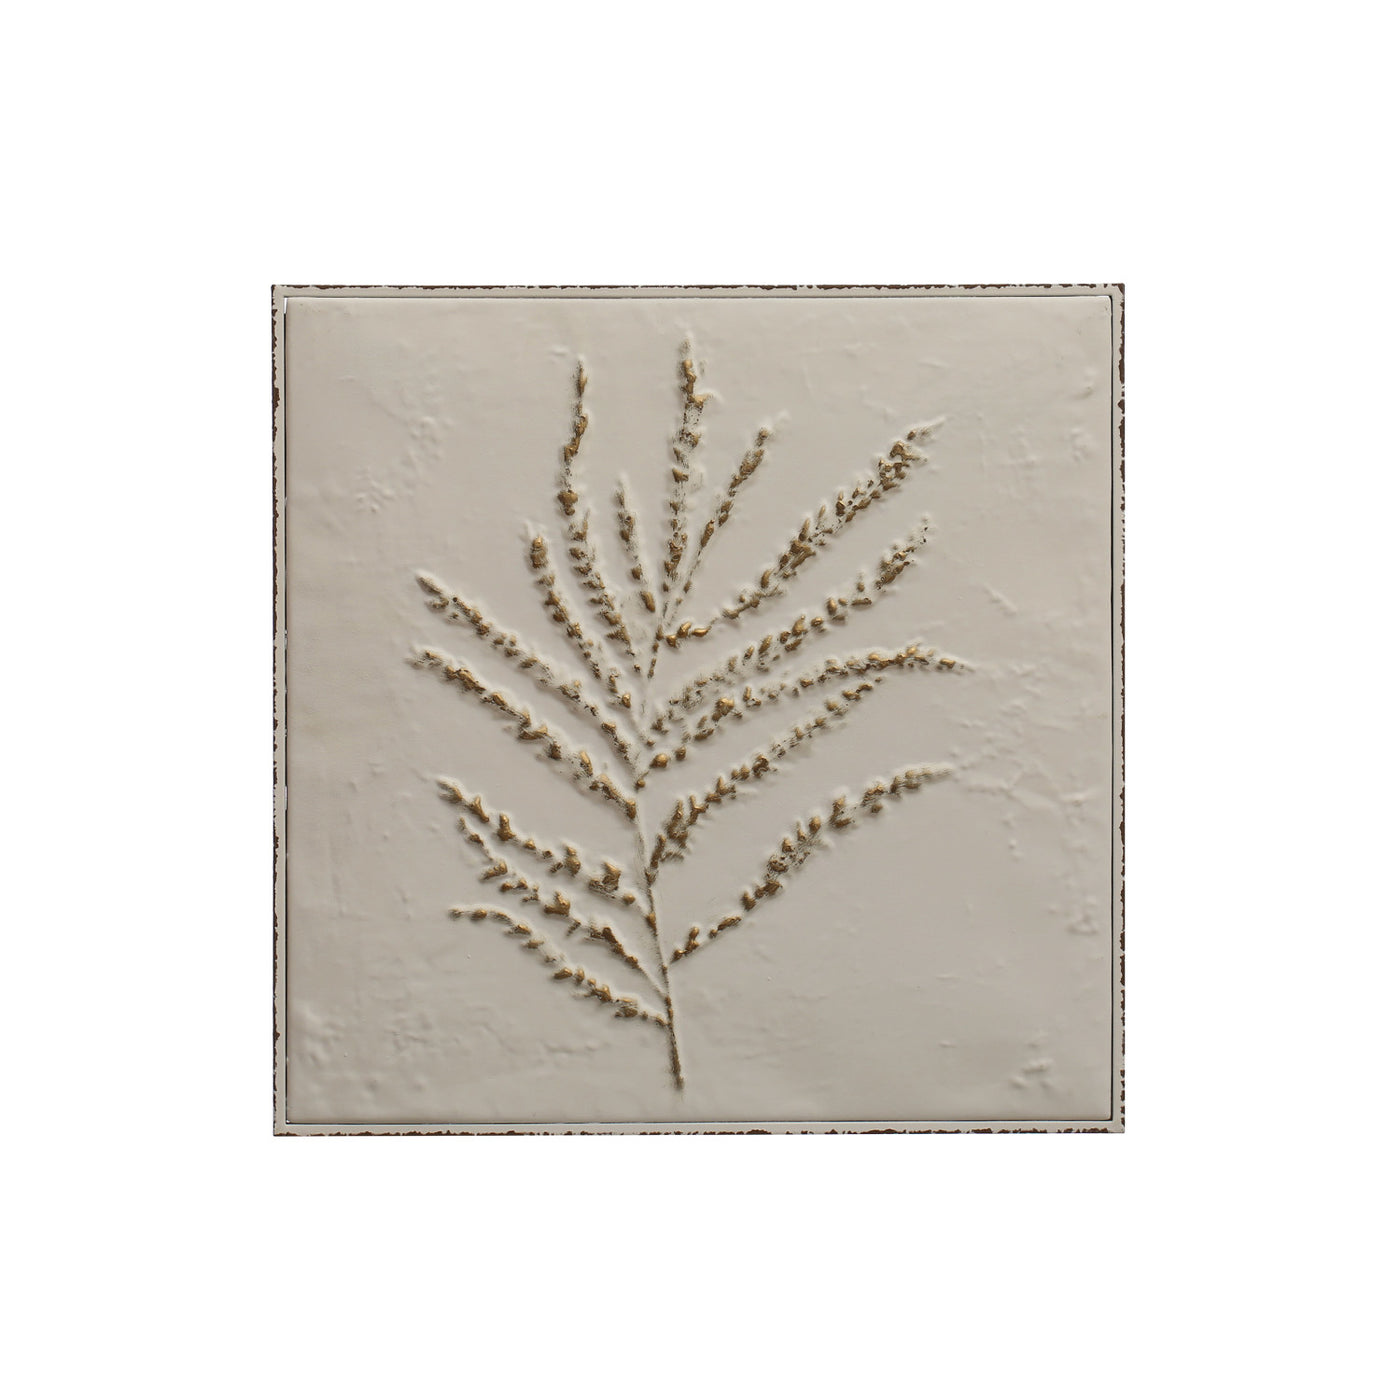 15" Square Embossed Metal Wall Décor w/ Botanical